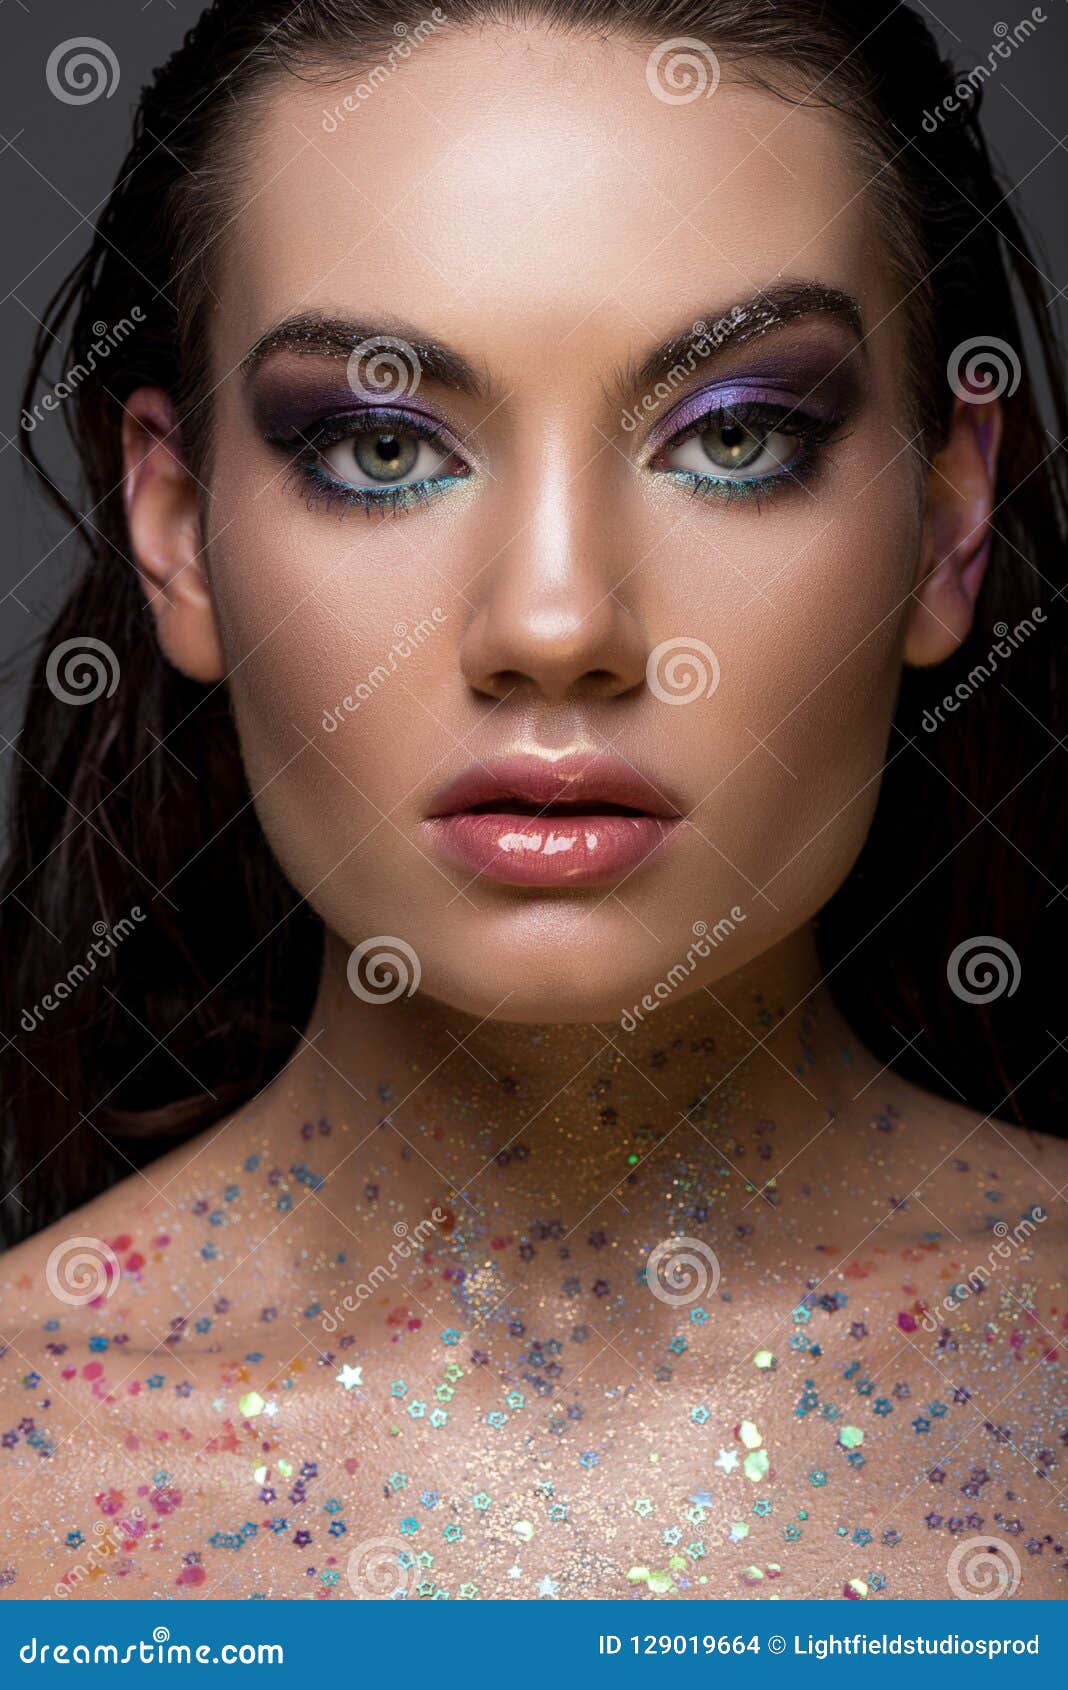 Beautiful Glamorous Girl Posing With Glitter On Body And Looking At Camera Stock Photo Image Of Lookingatcamera Charming